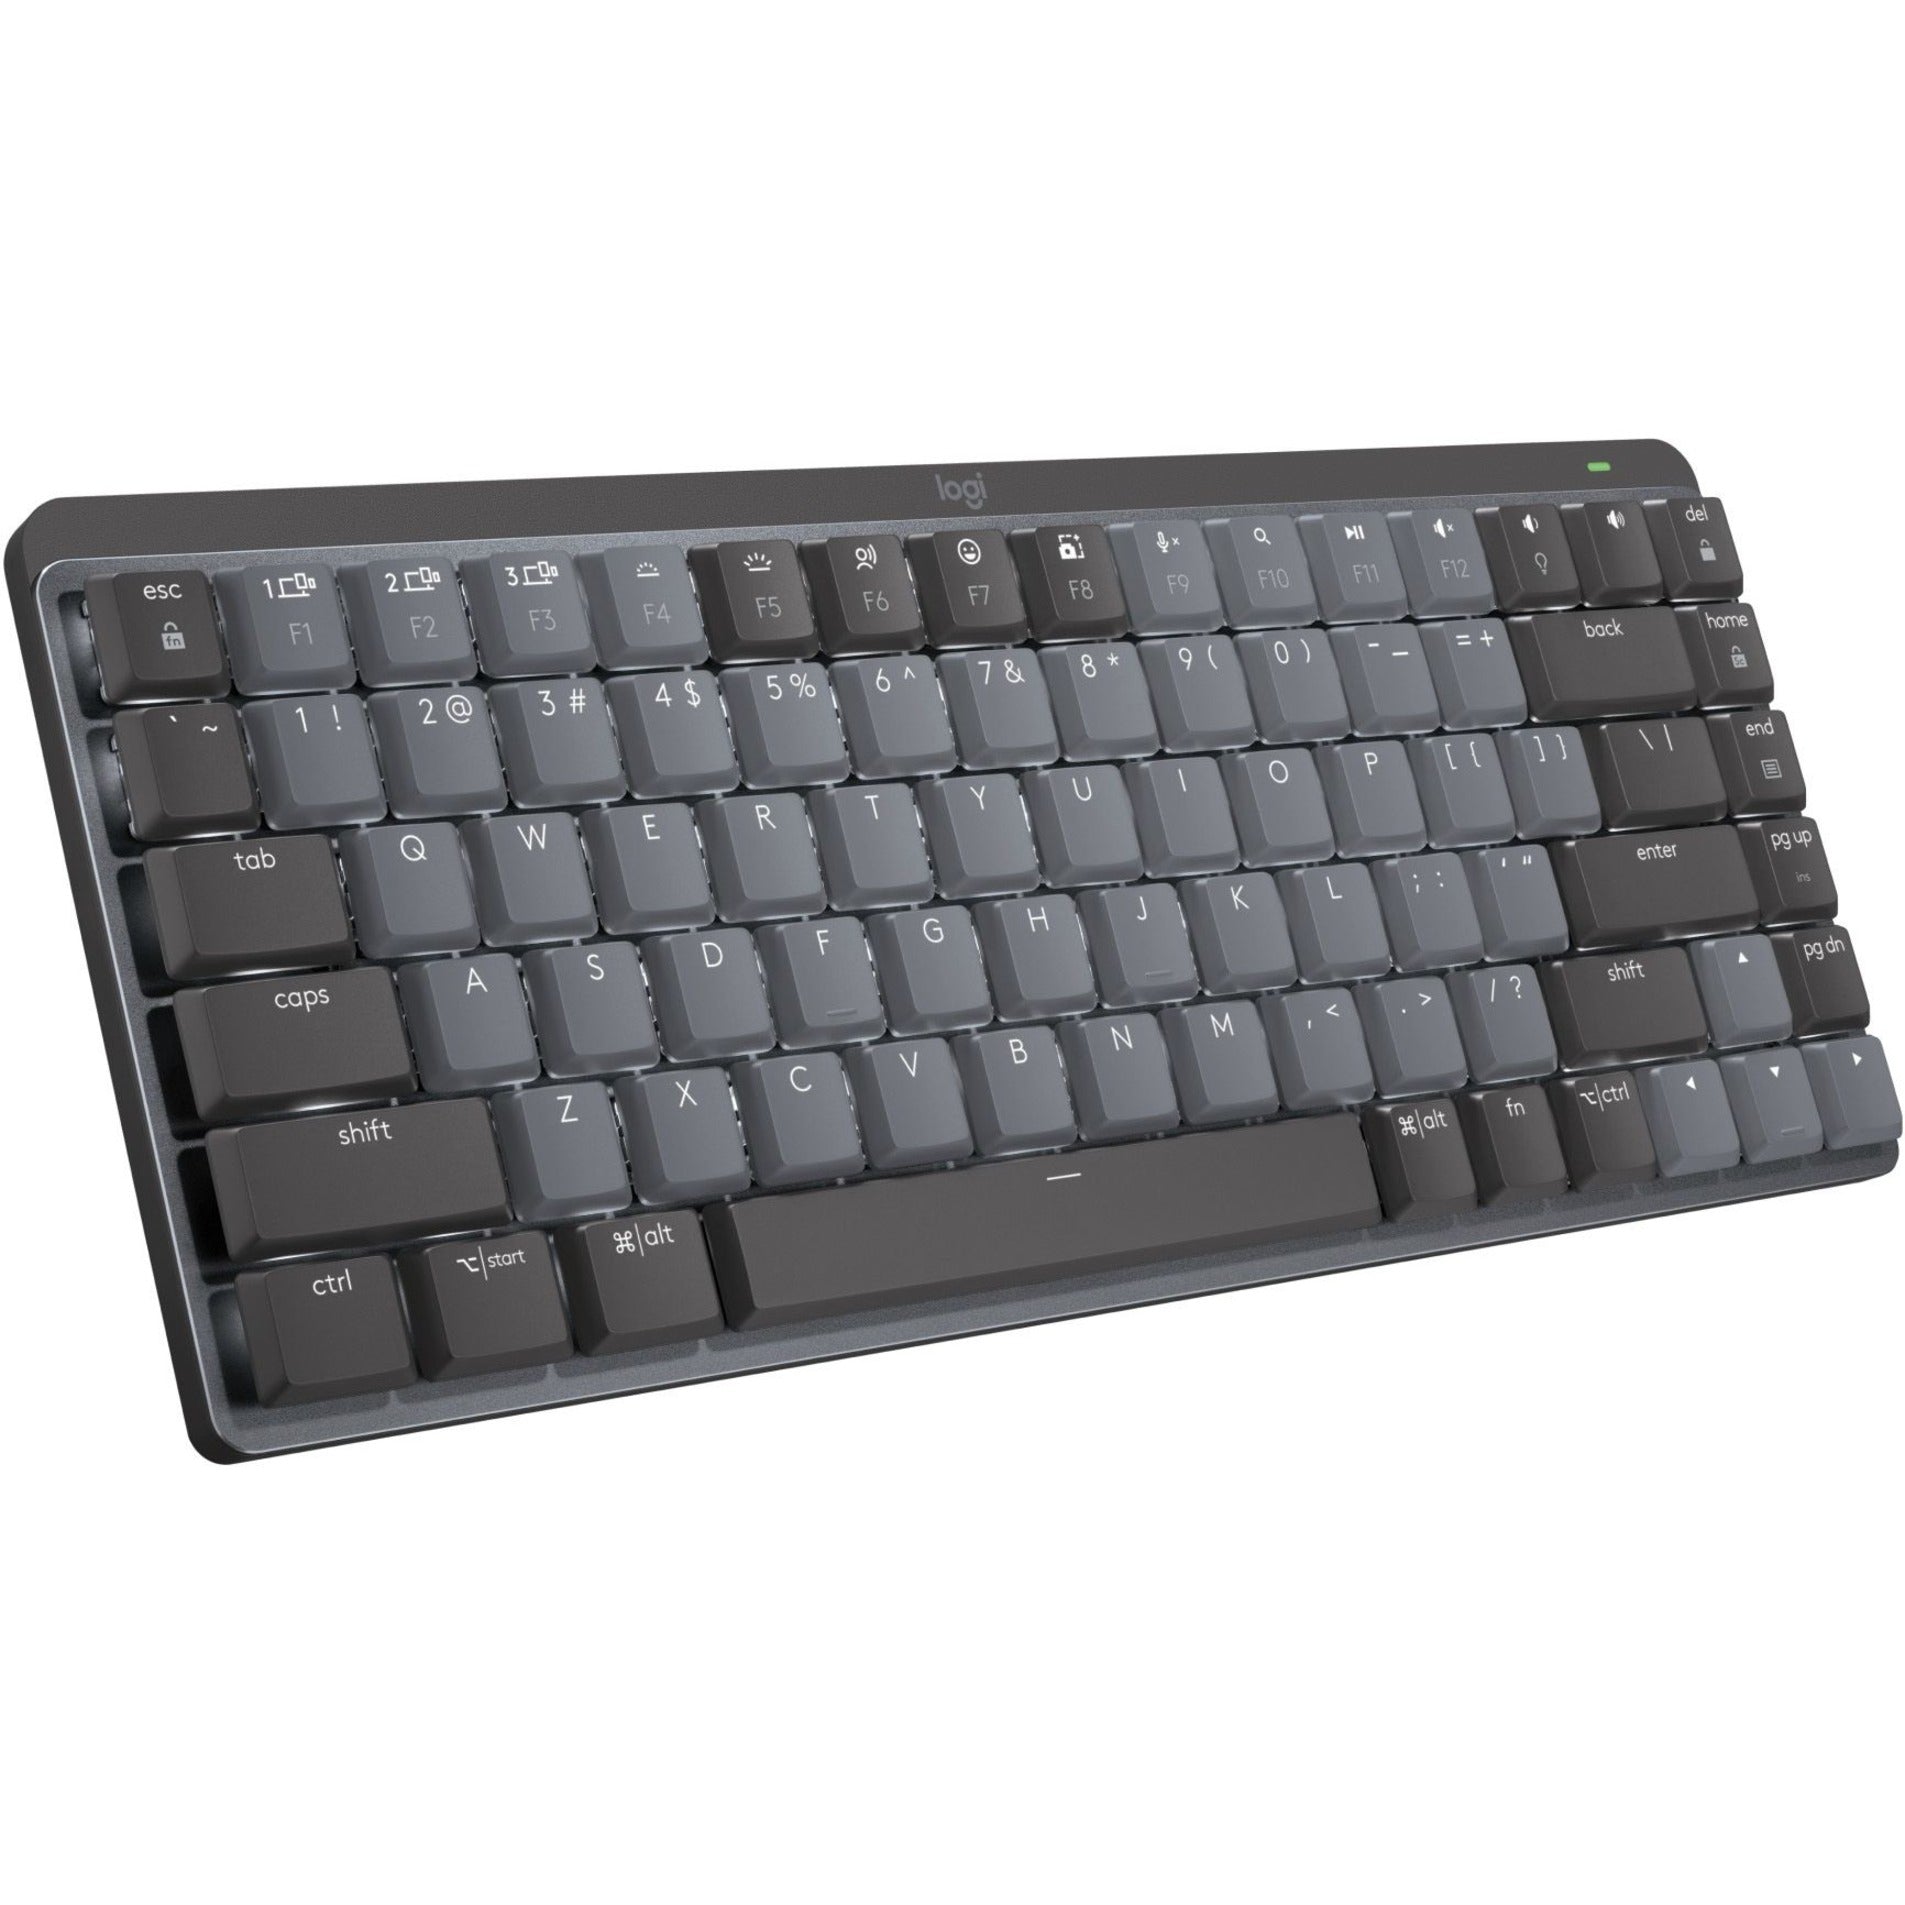 Logitech 920-010552 MX Mechanical Mini Minimalist Wireless Illuminated Keyboard (Clicky) (Graphite), Compact and Backlit for PC, Mac, and More